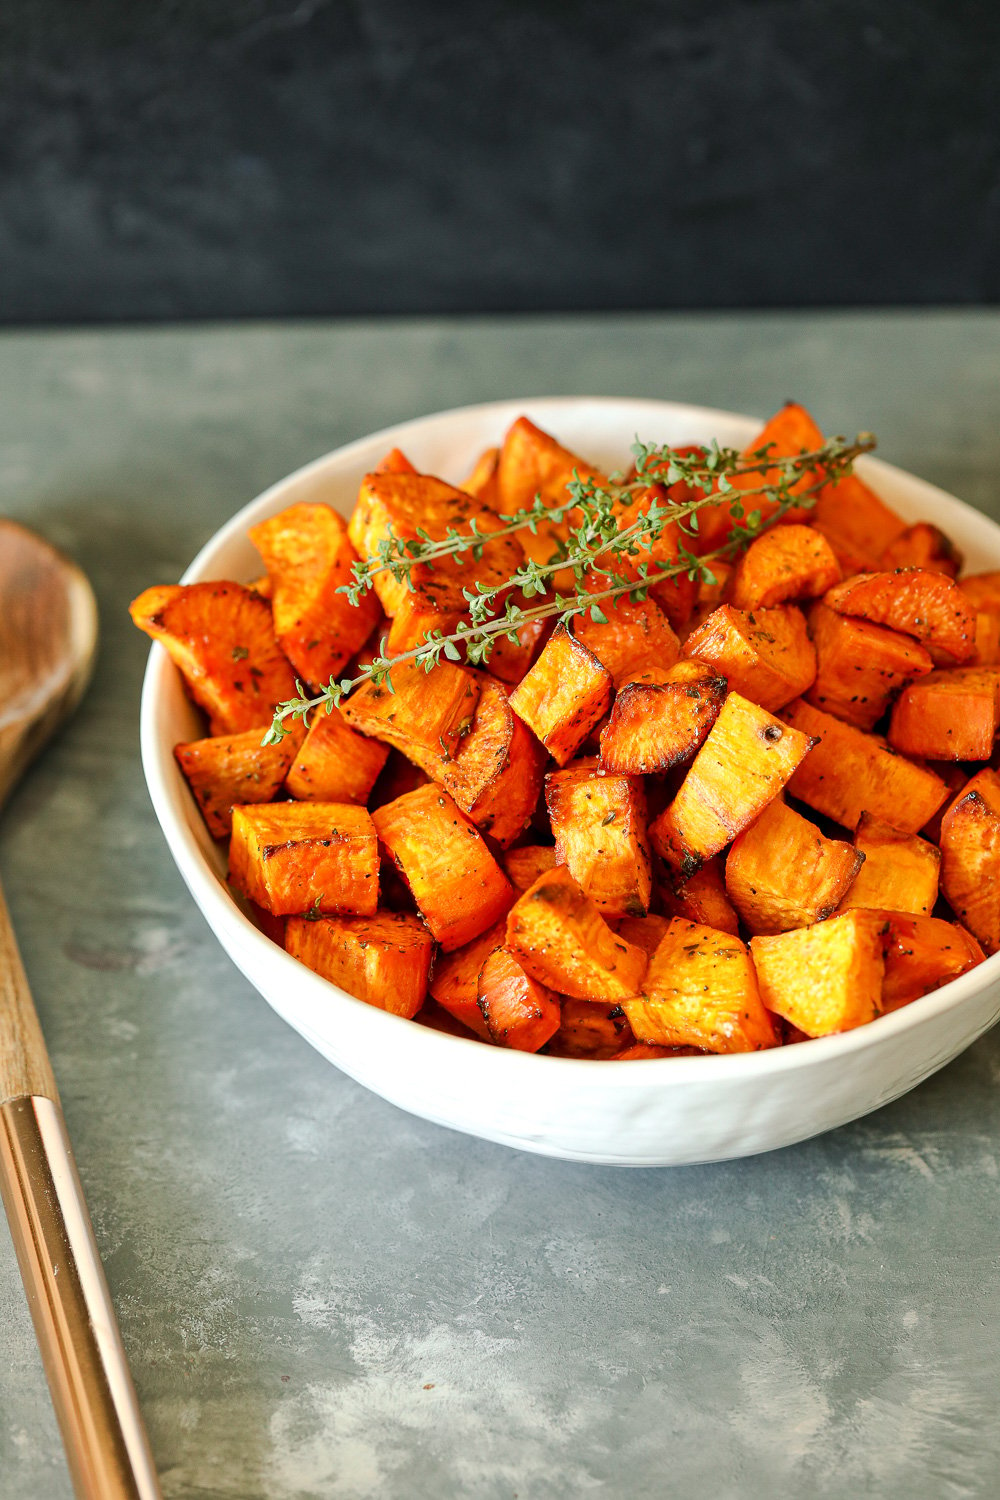 These Maple Thyme Roasted Sweet Potatoes are so simple to make yet so delicious!